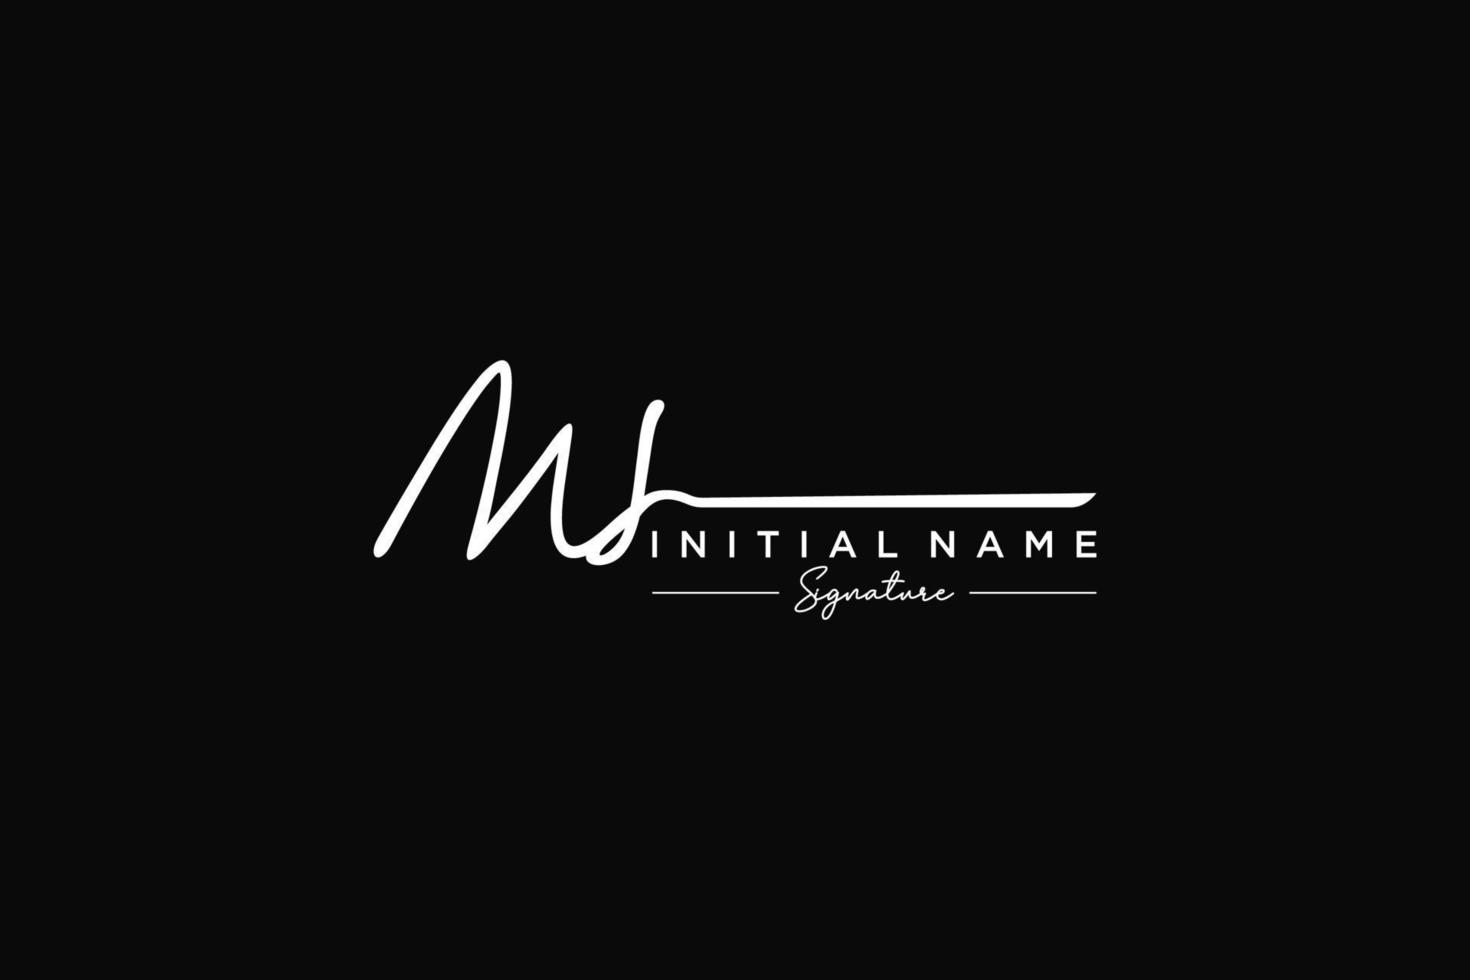 Initial MS signature logo template vector. Hand drawn Calligraphy lettering Vector illustration.